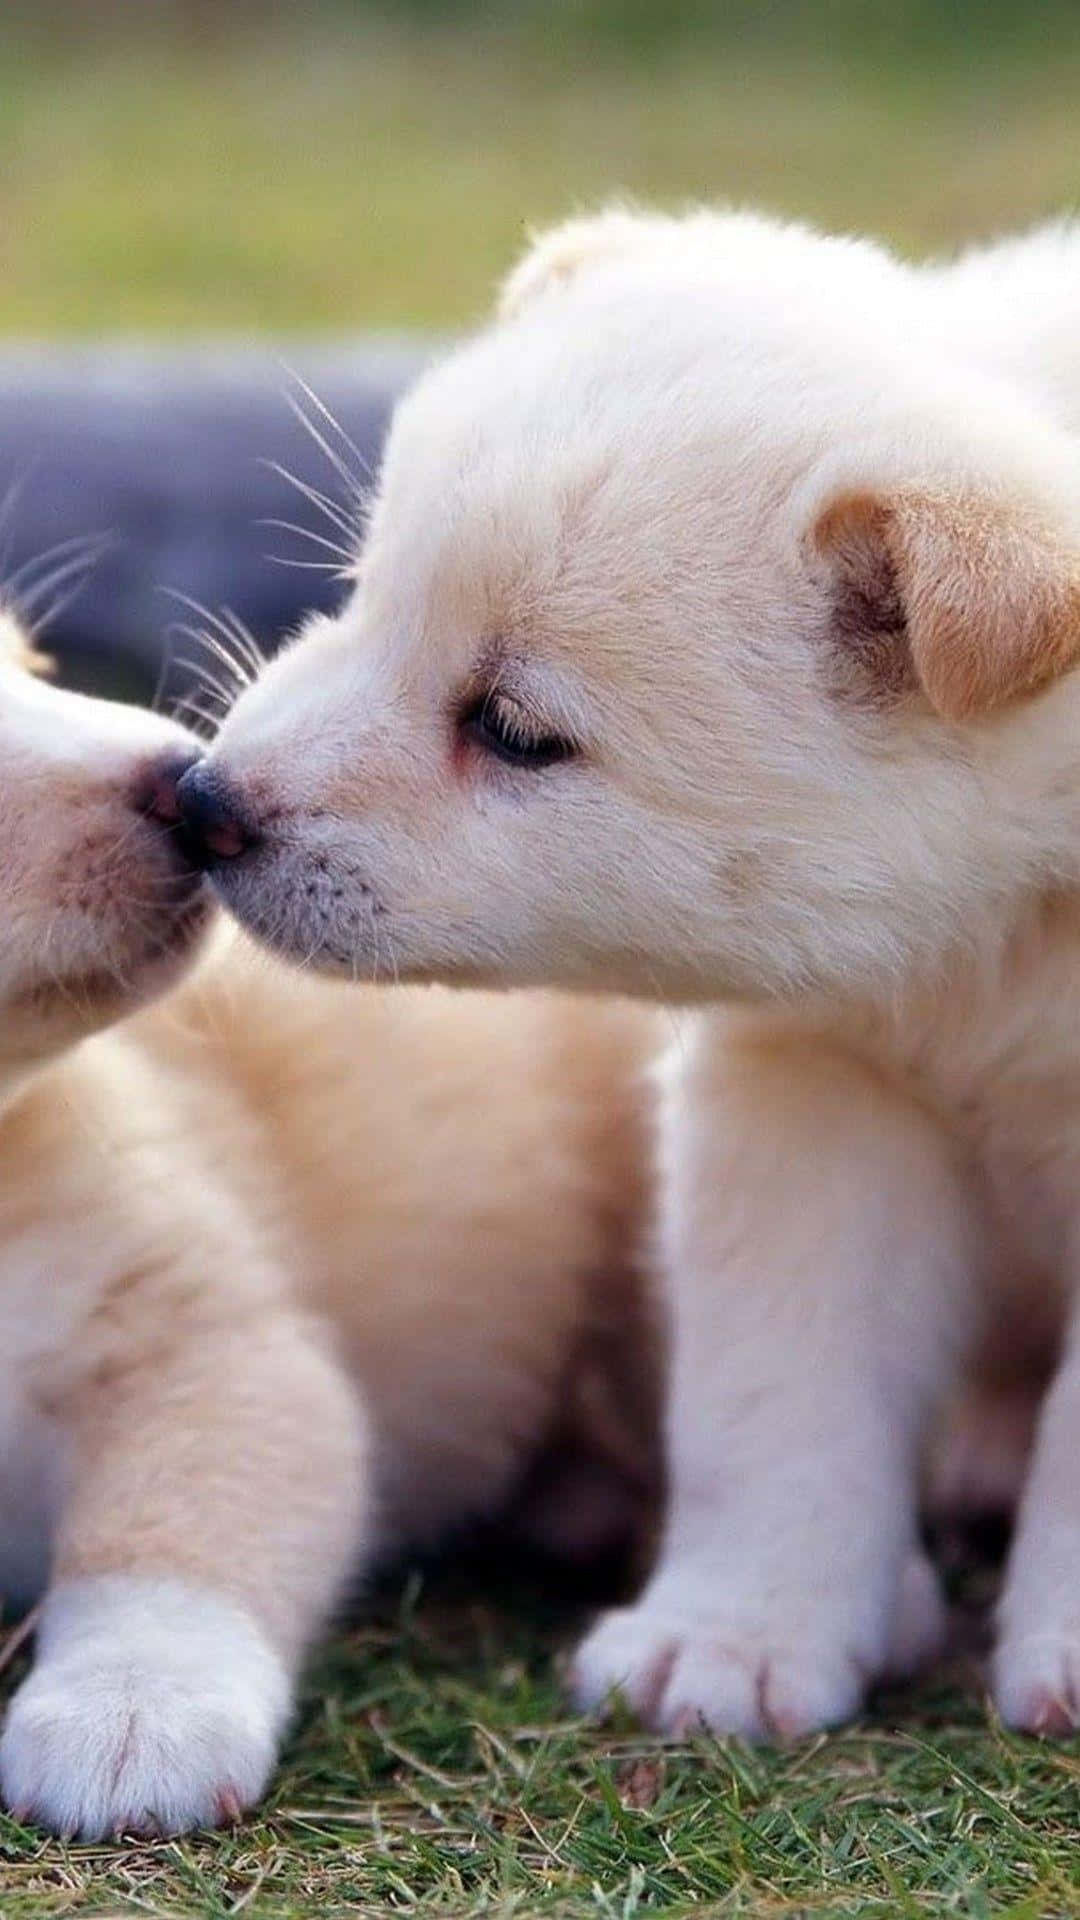 Two Puppies Kissing On The Grass Wallpaper